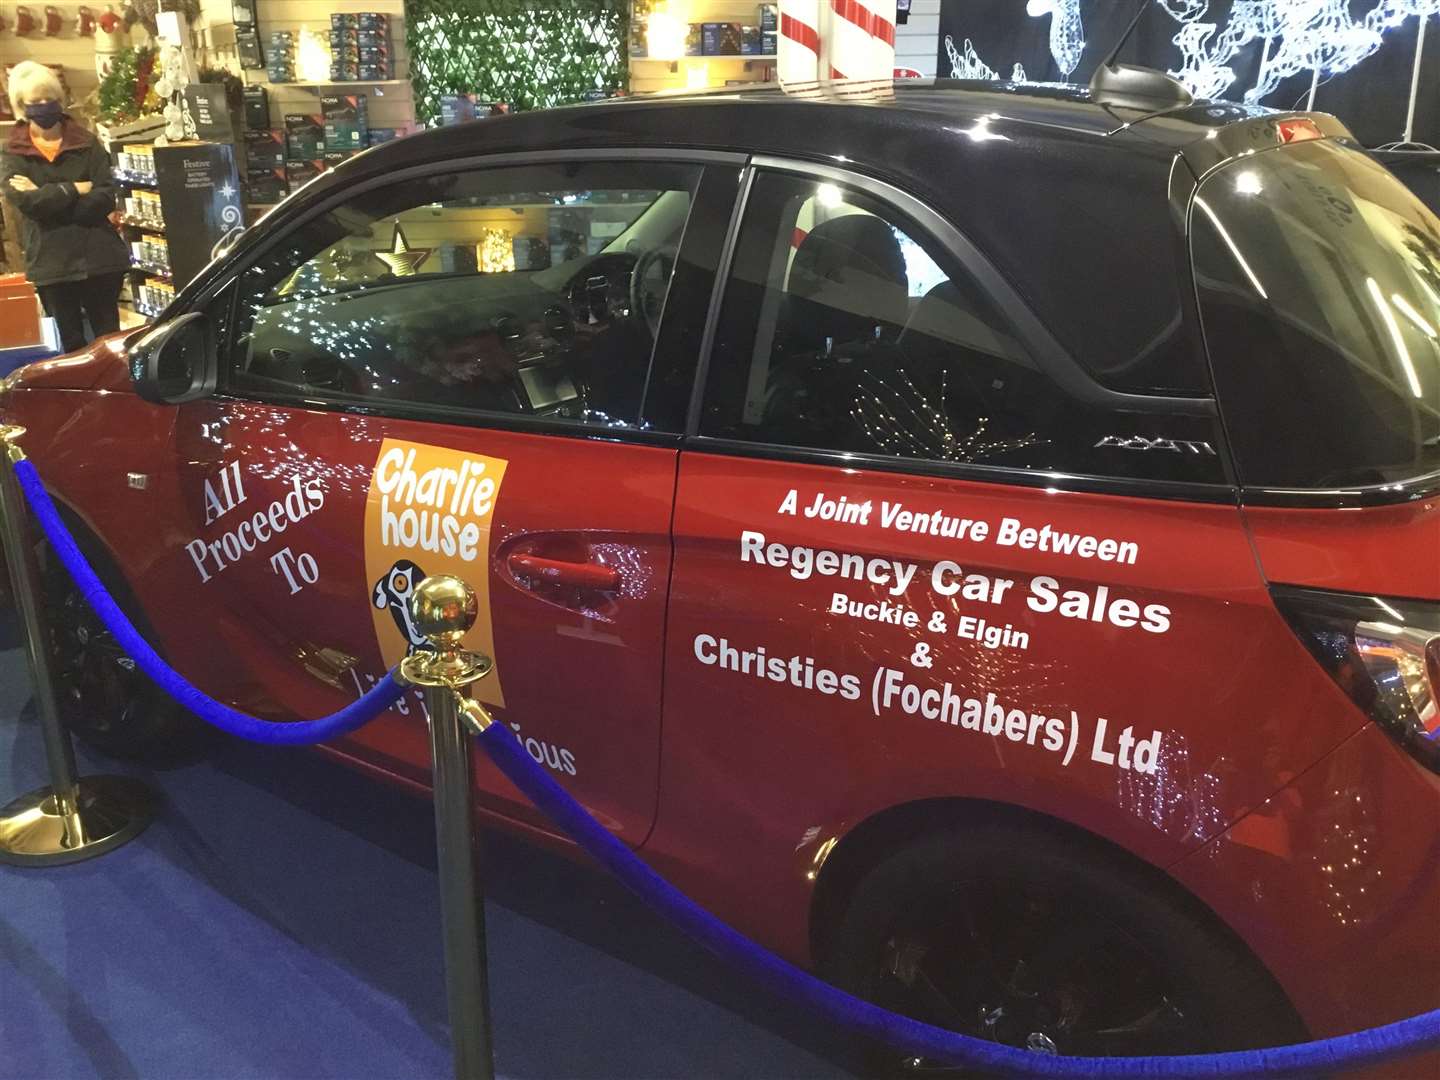 The Vauxhall Adam car being raffled at Christies of Fochabers, with all proceeds going to Charlie House.